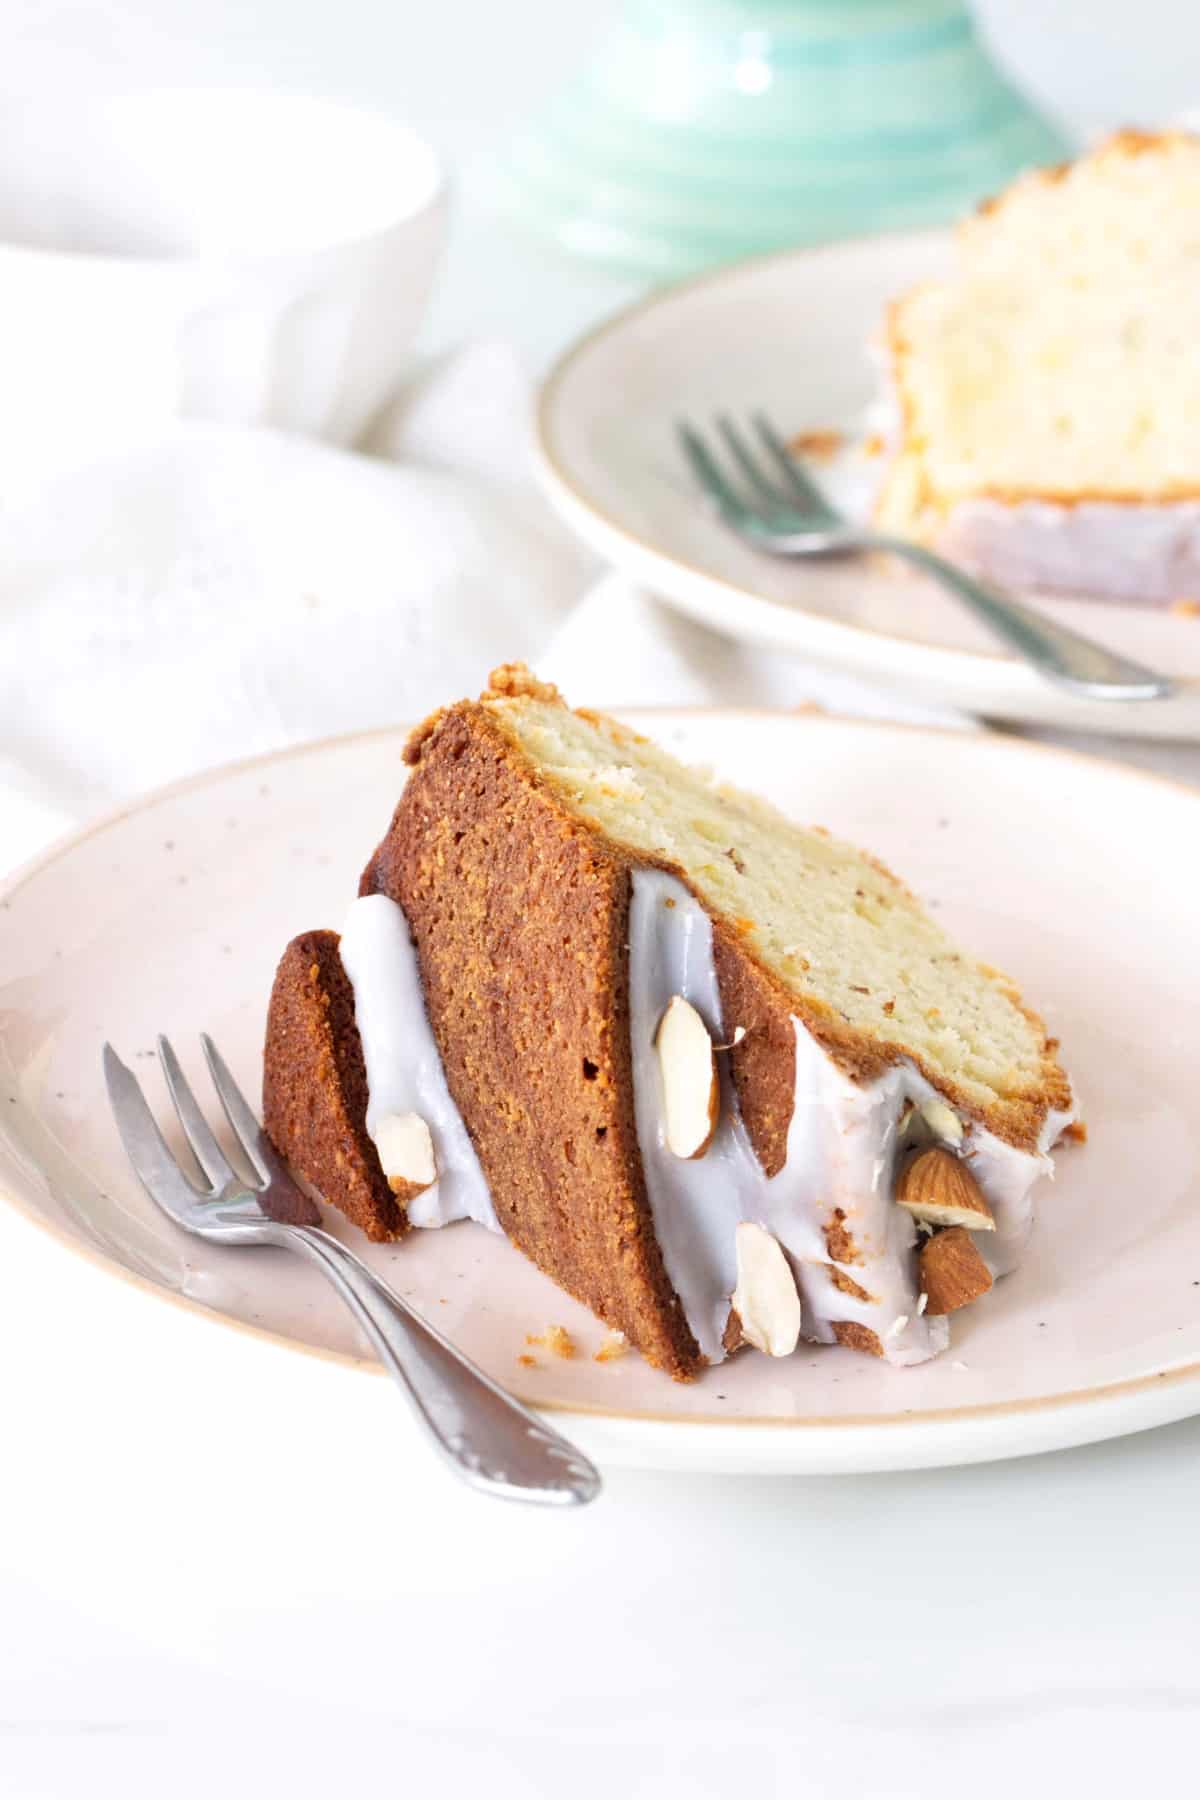 Slice of glazed almond bundt cake on a plate with fork, another slice in background